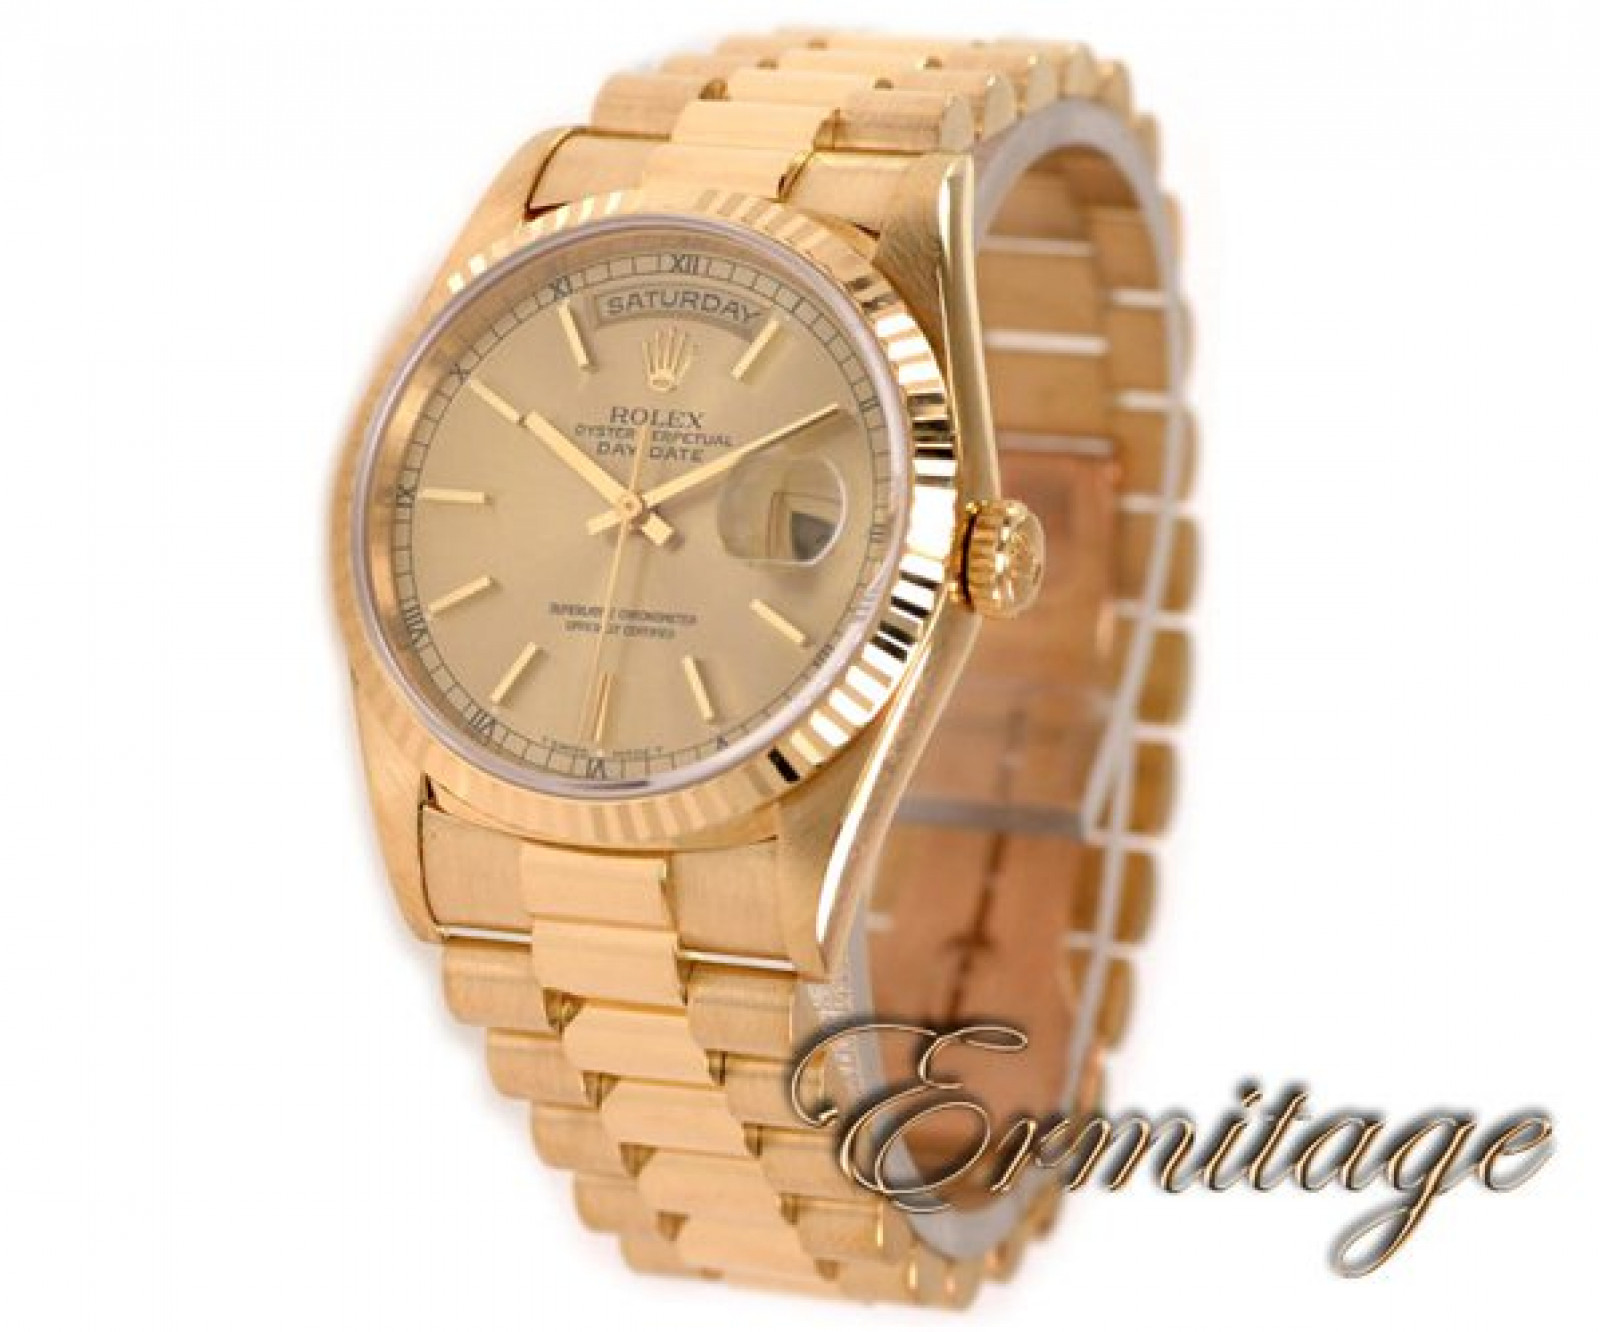 Rolex Day-Date 18238 Gold Champagne 1997 | Jewelers